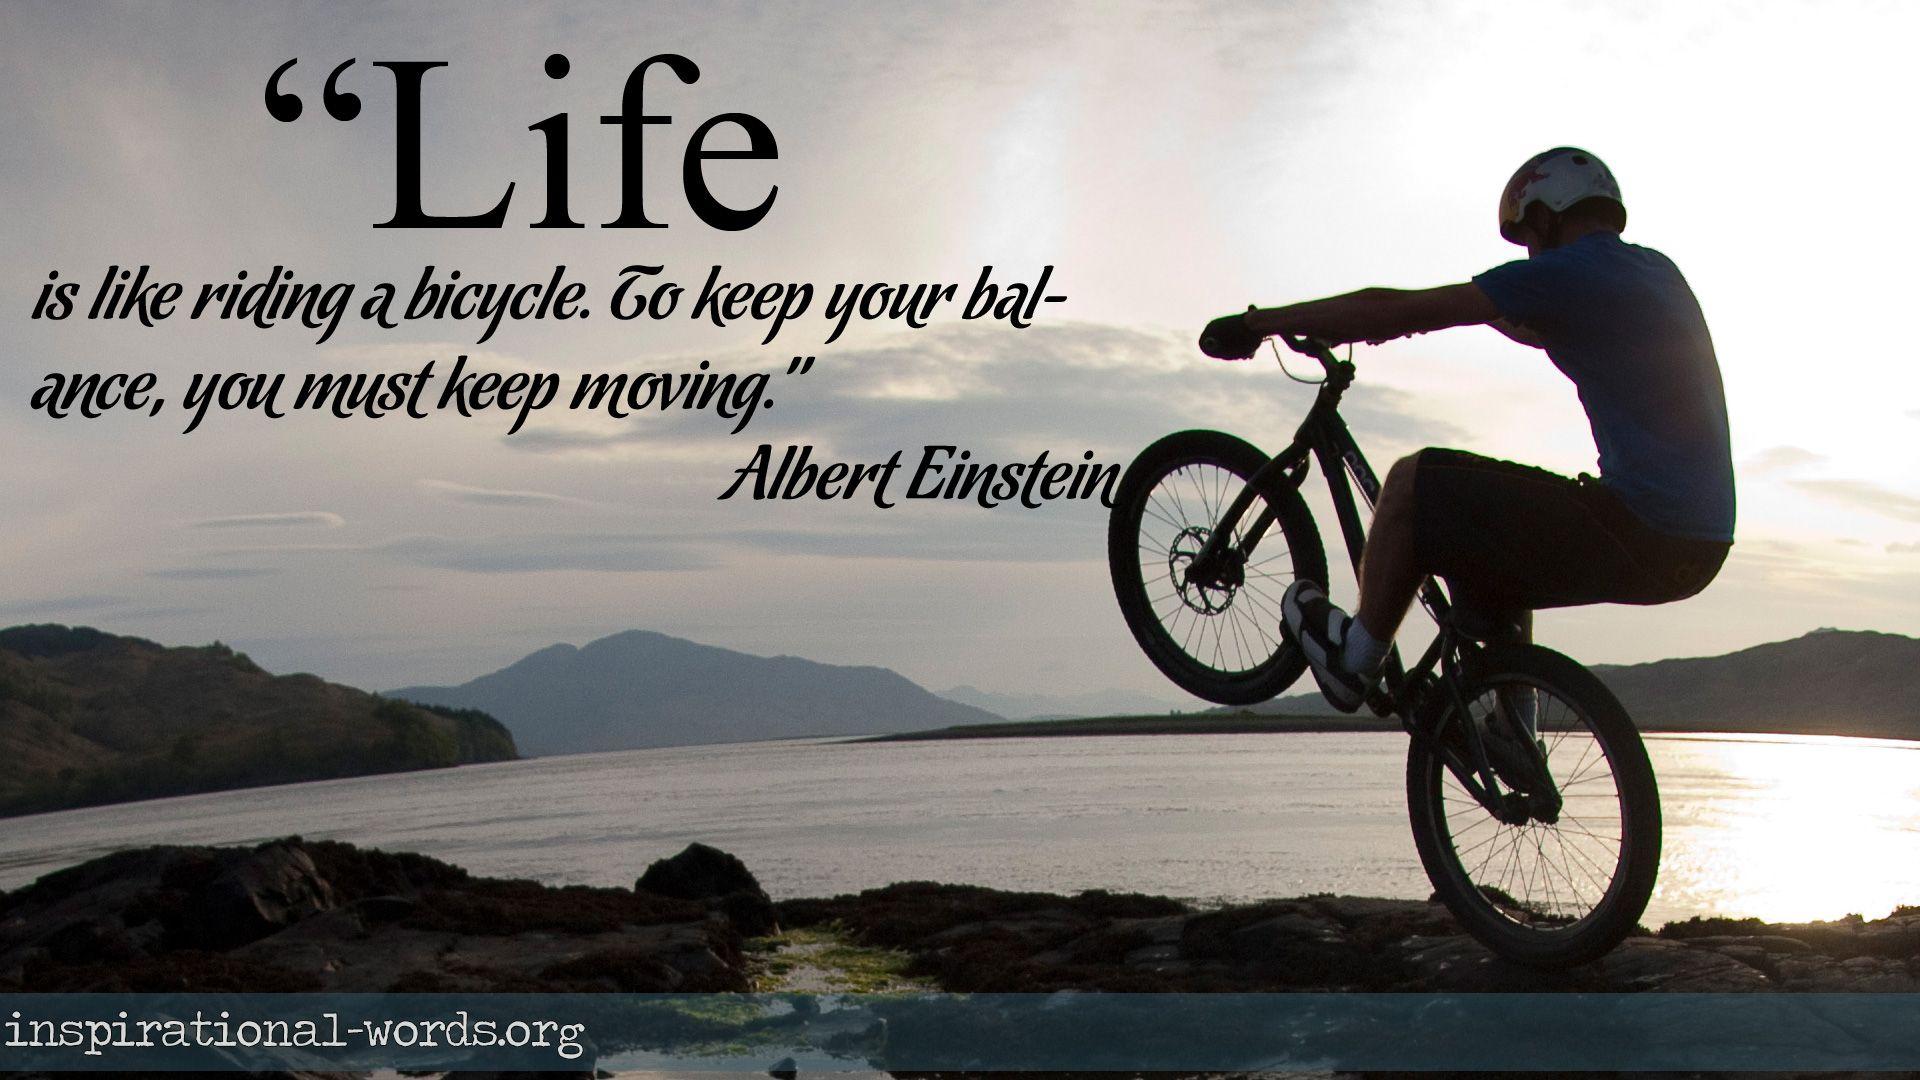 Inspirational Wallpaper Quote by Albert Einstein “Life is like